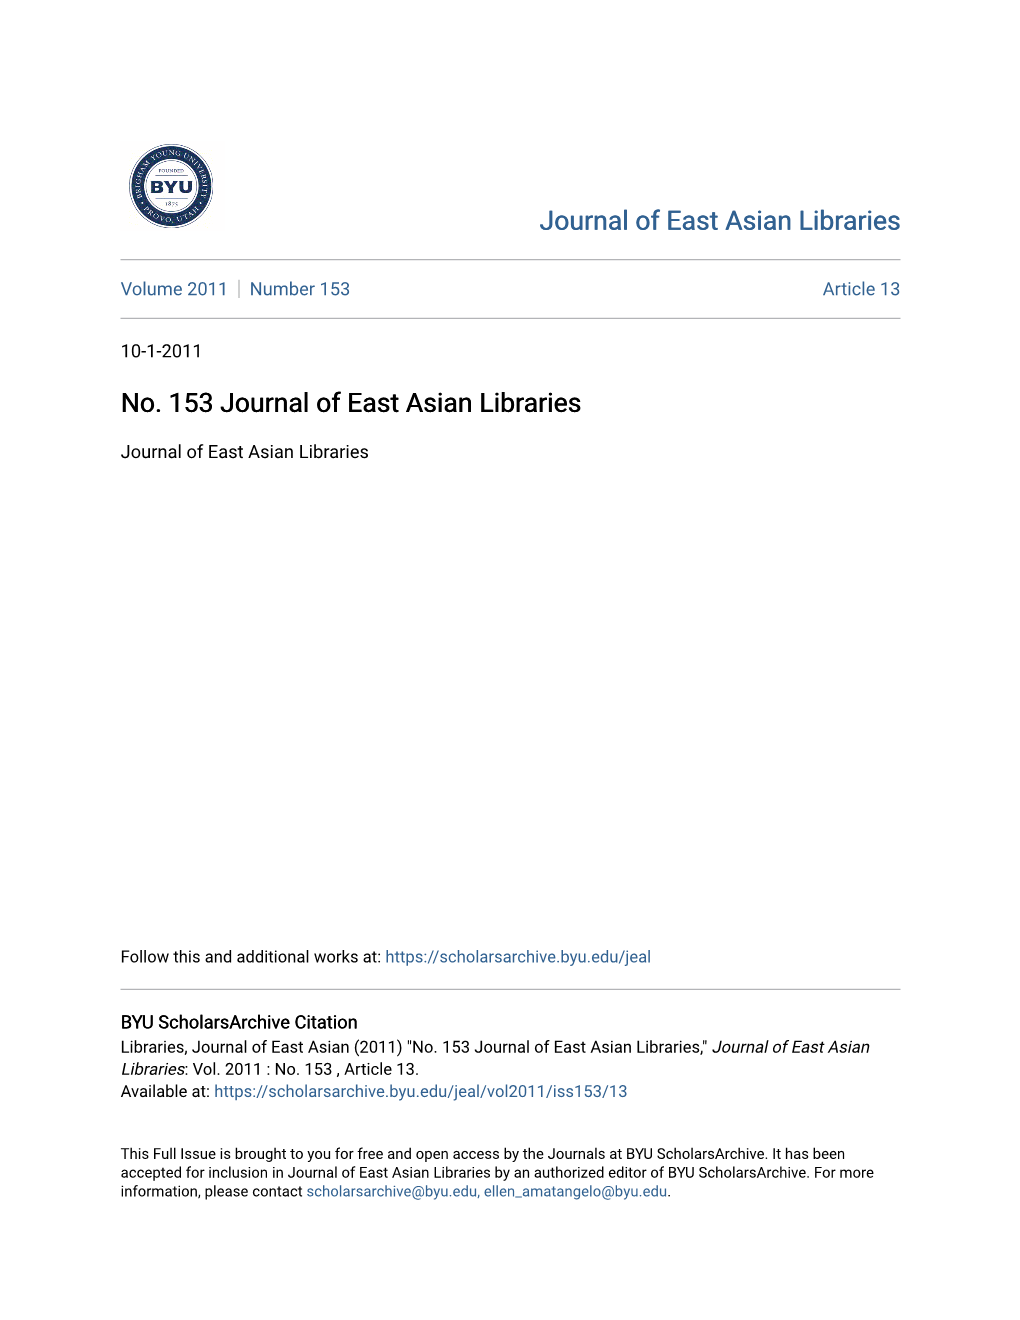 No. 153 Journal of East Asian Libraries